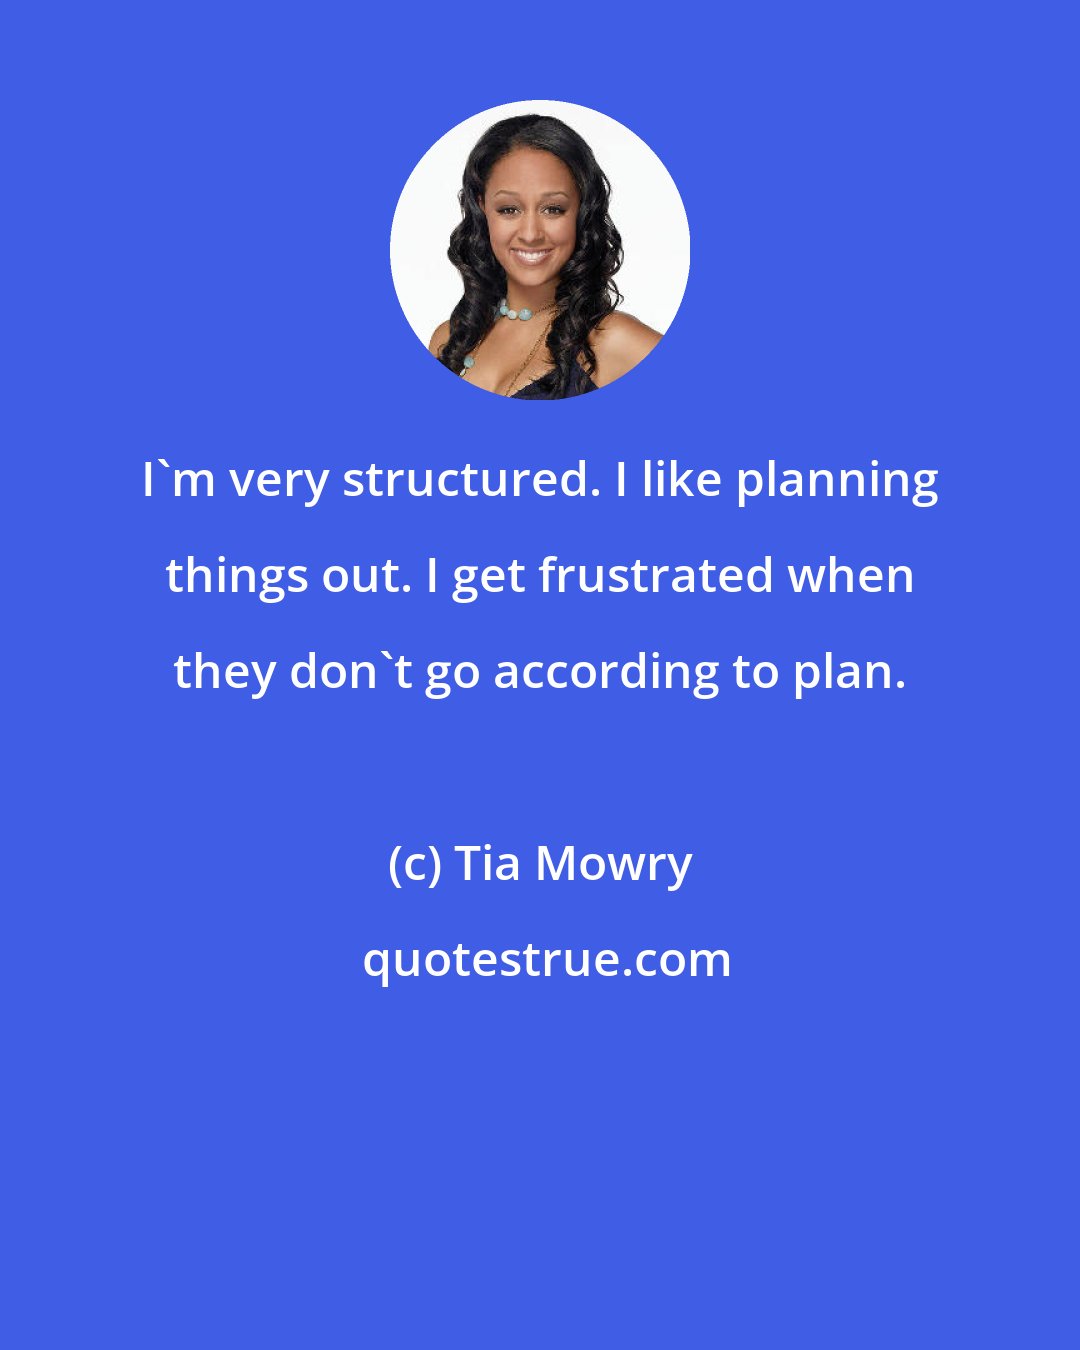 Tia Mowry: I'm very structured. I like planning things out. I get frustrated when they don't go according to plan.